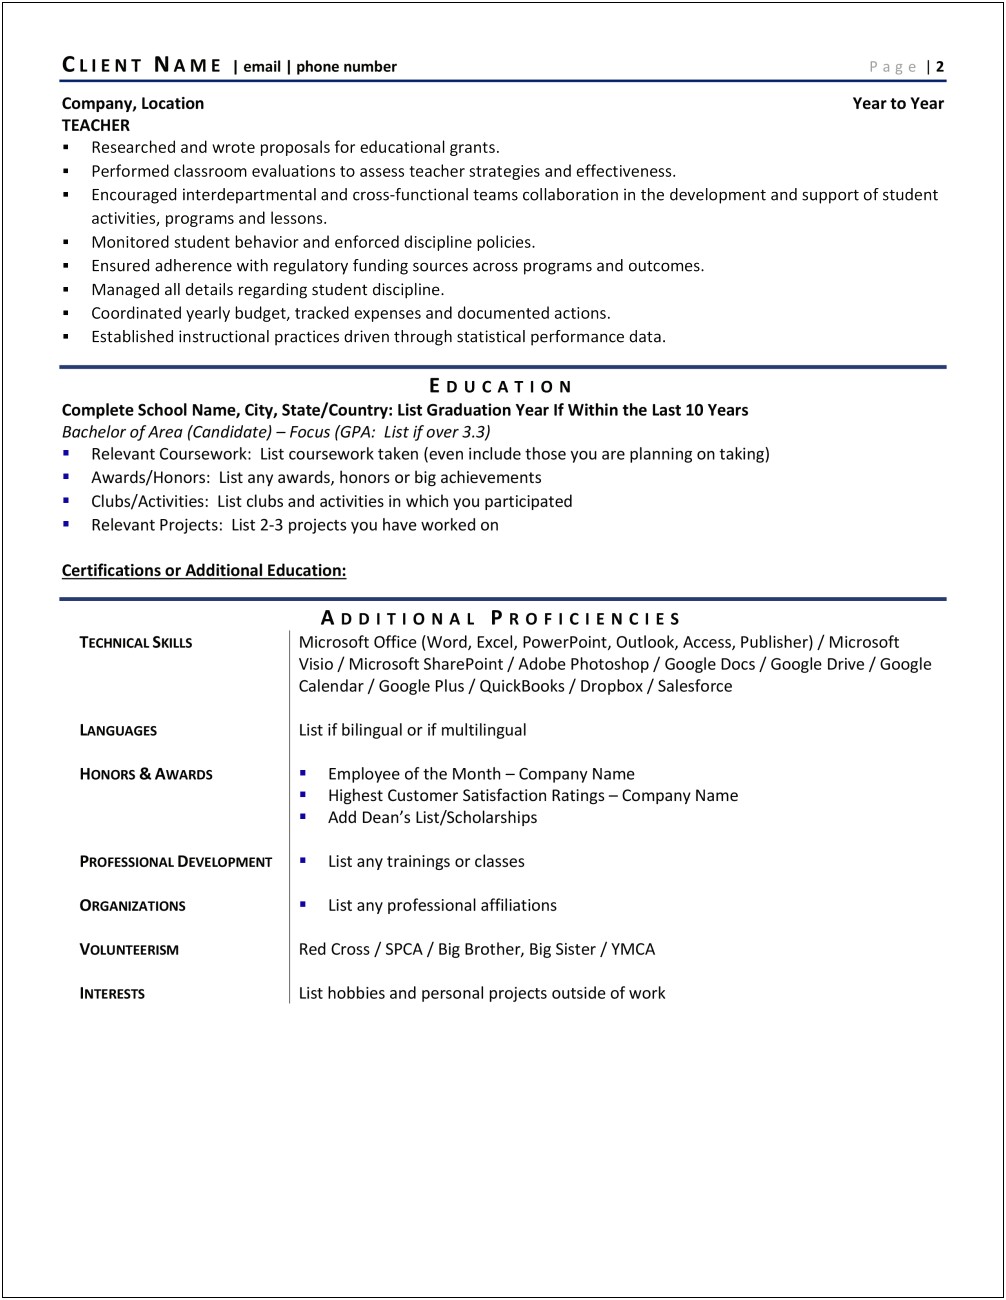 Sample Resume With Relevant Coursework